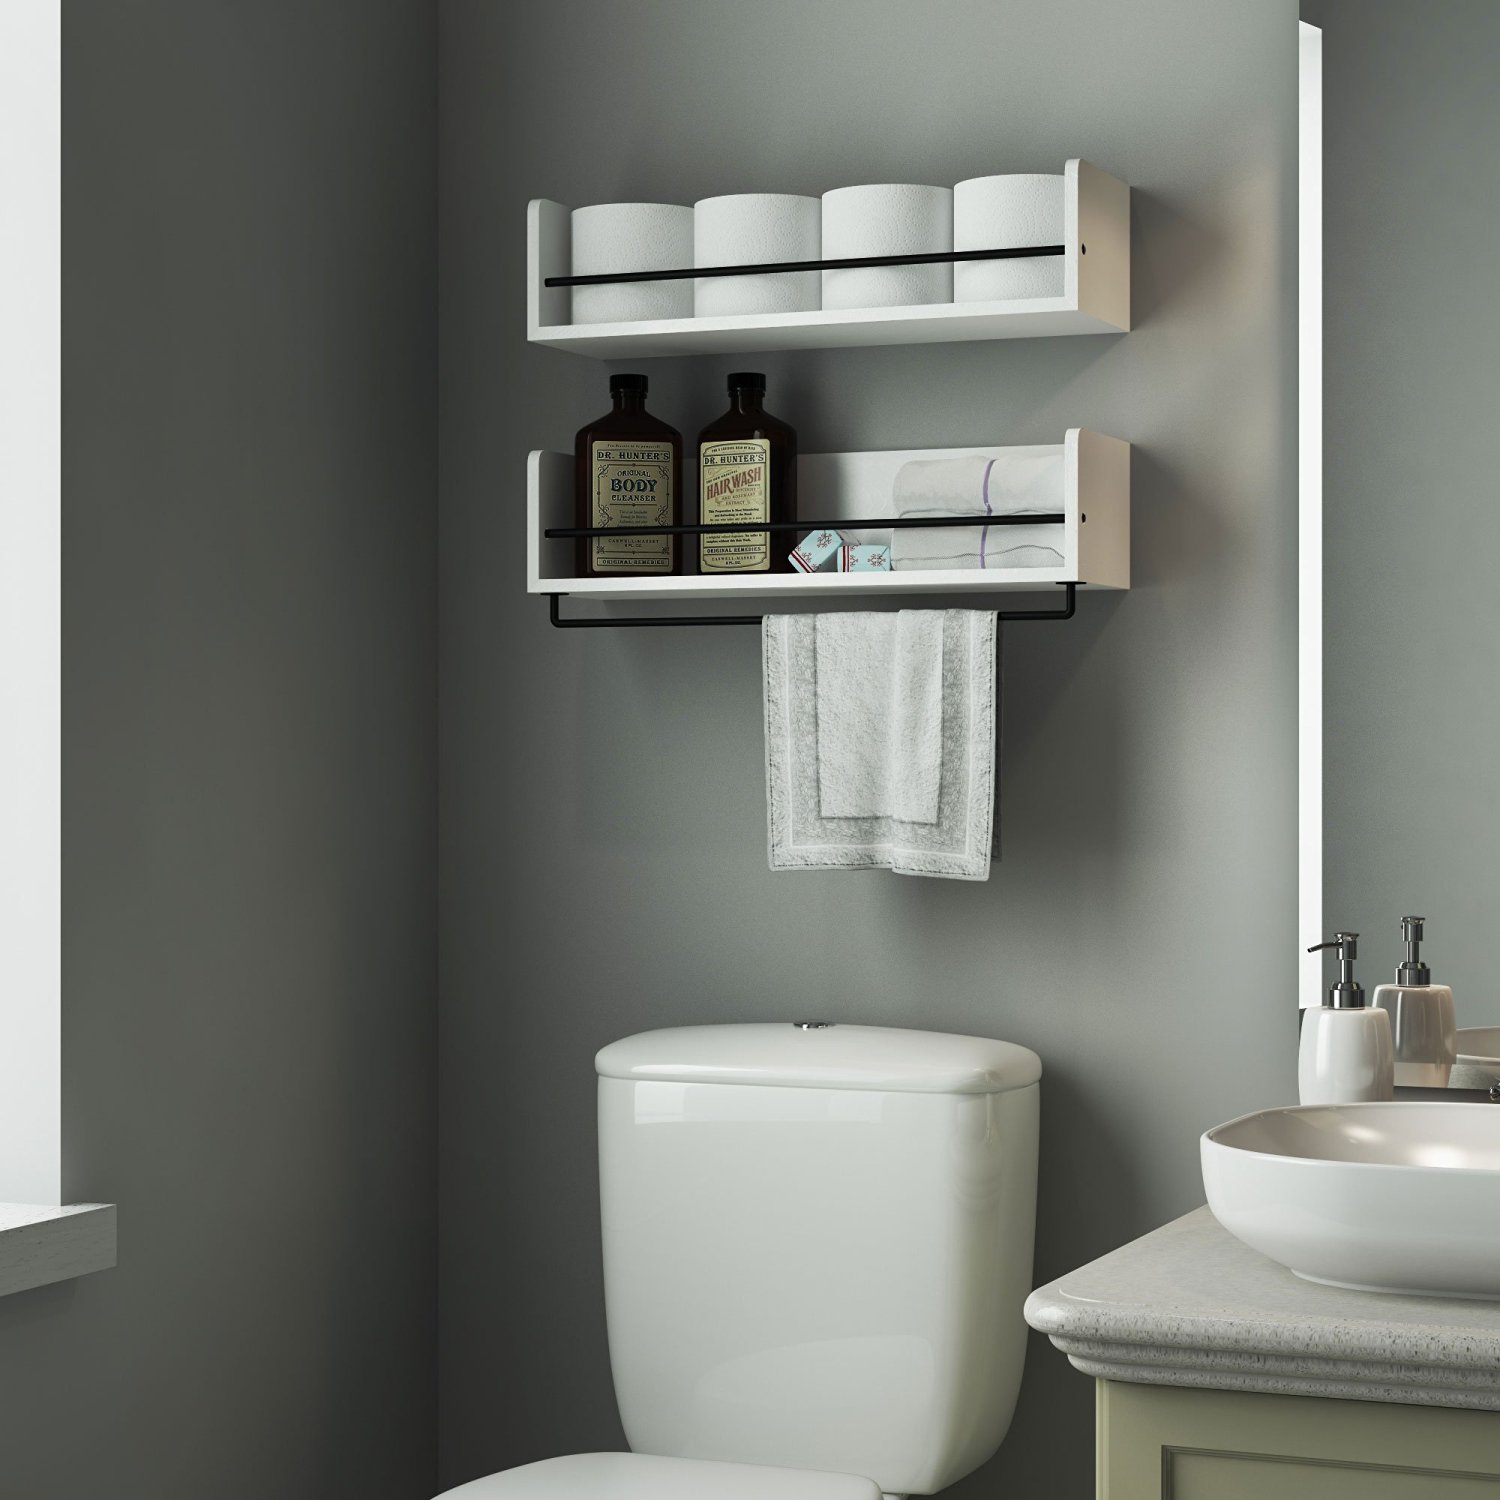 Beautiful white shelves in the bathroom over the toilet.  Looks stunning with that paint color